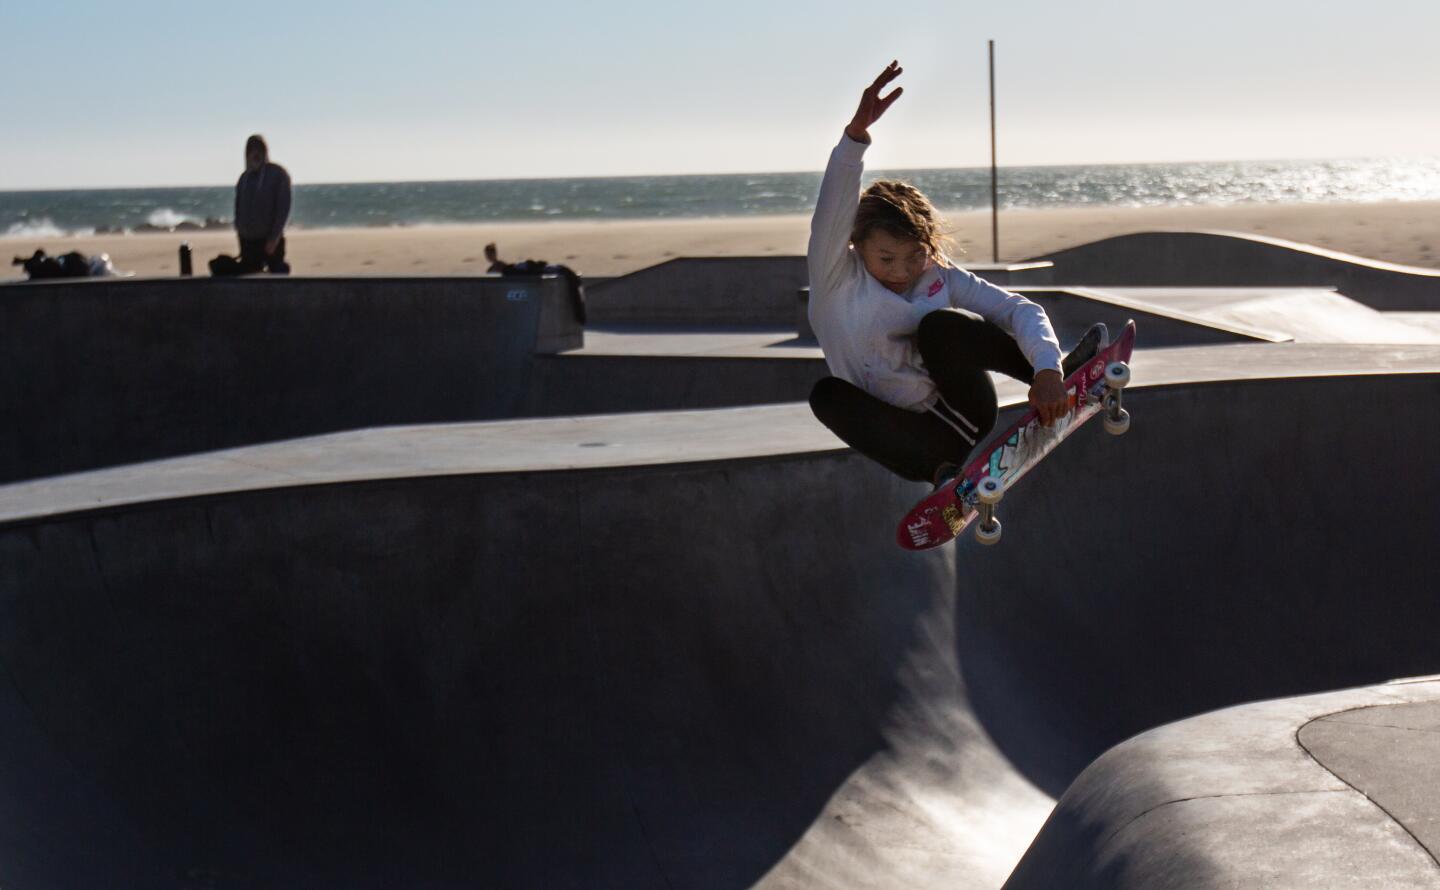 Skateboarder Sky Brown, 11, at Venice Skate Park on Wednesday in Venice. Brown is set to be Britain's youngest ever Olympian in the 2020 Tokyo Olympics.